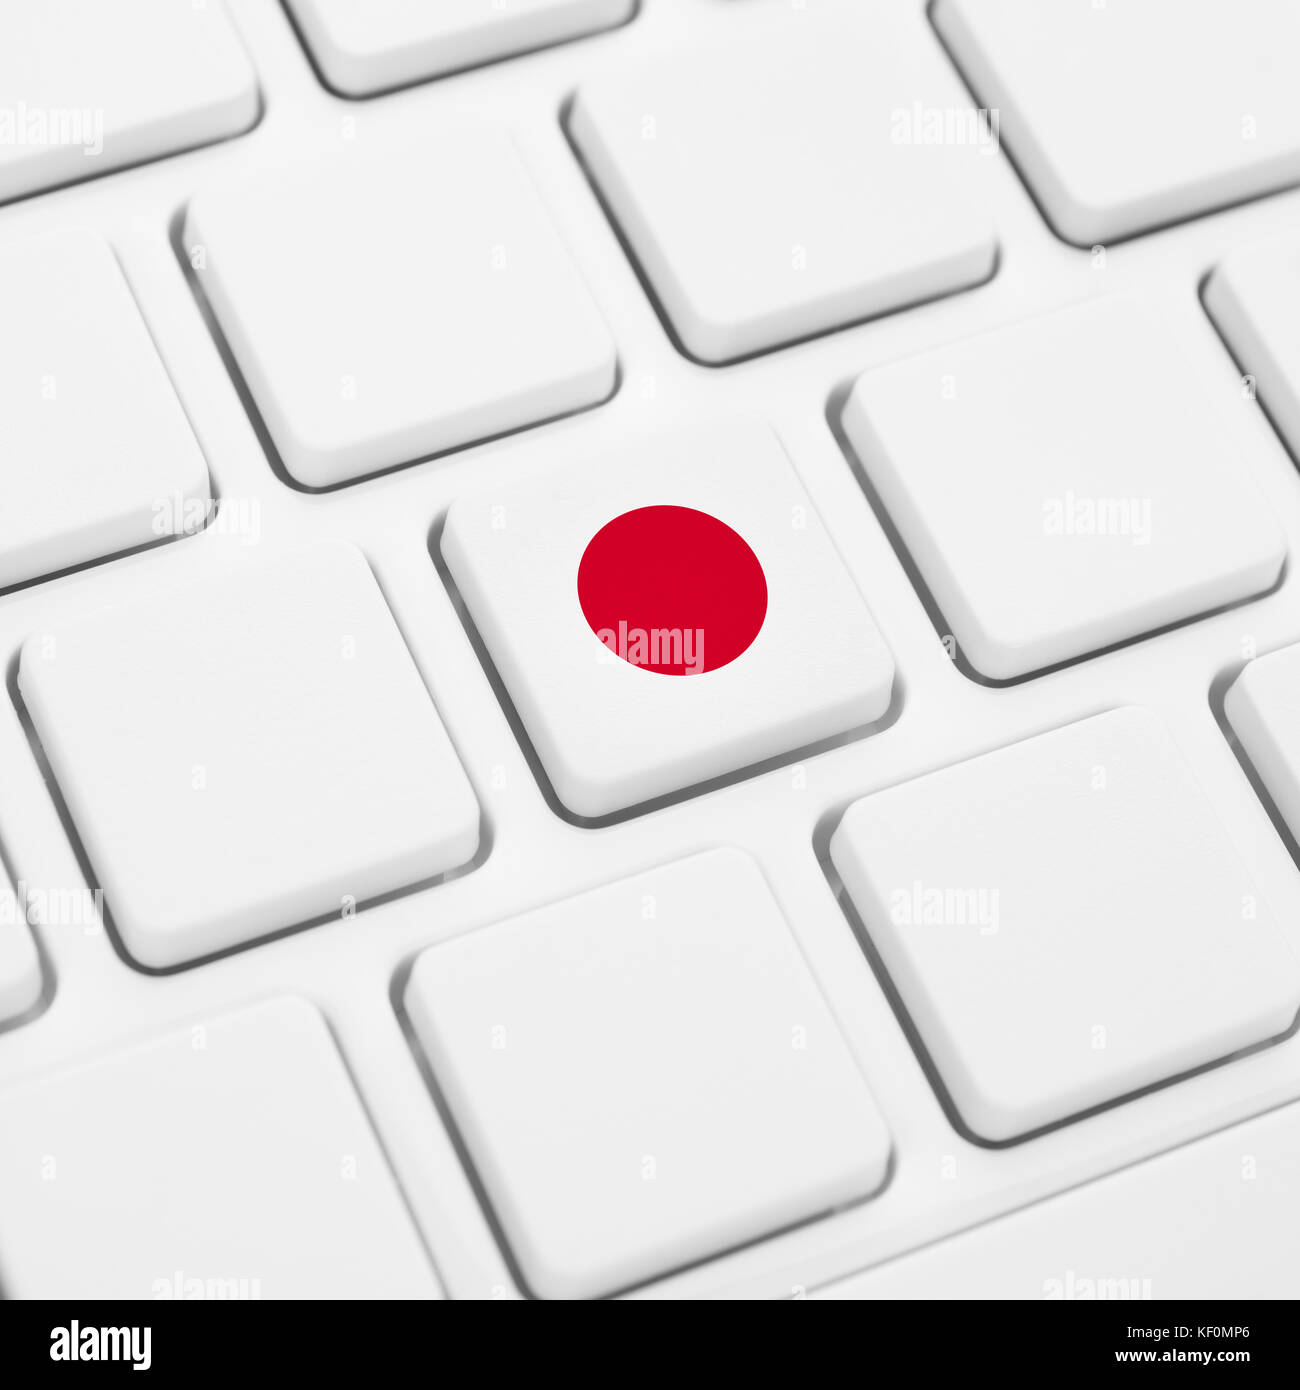 Japanese language or Japan web concept. National flag button or key on white keyboard Stock Photo